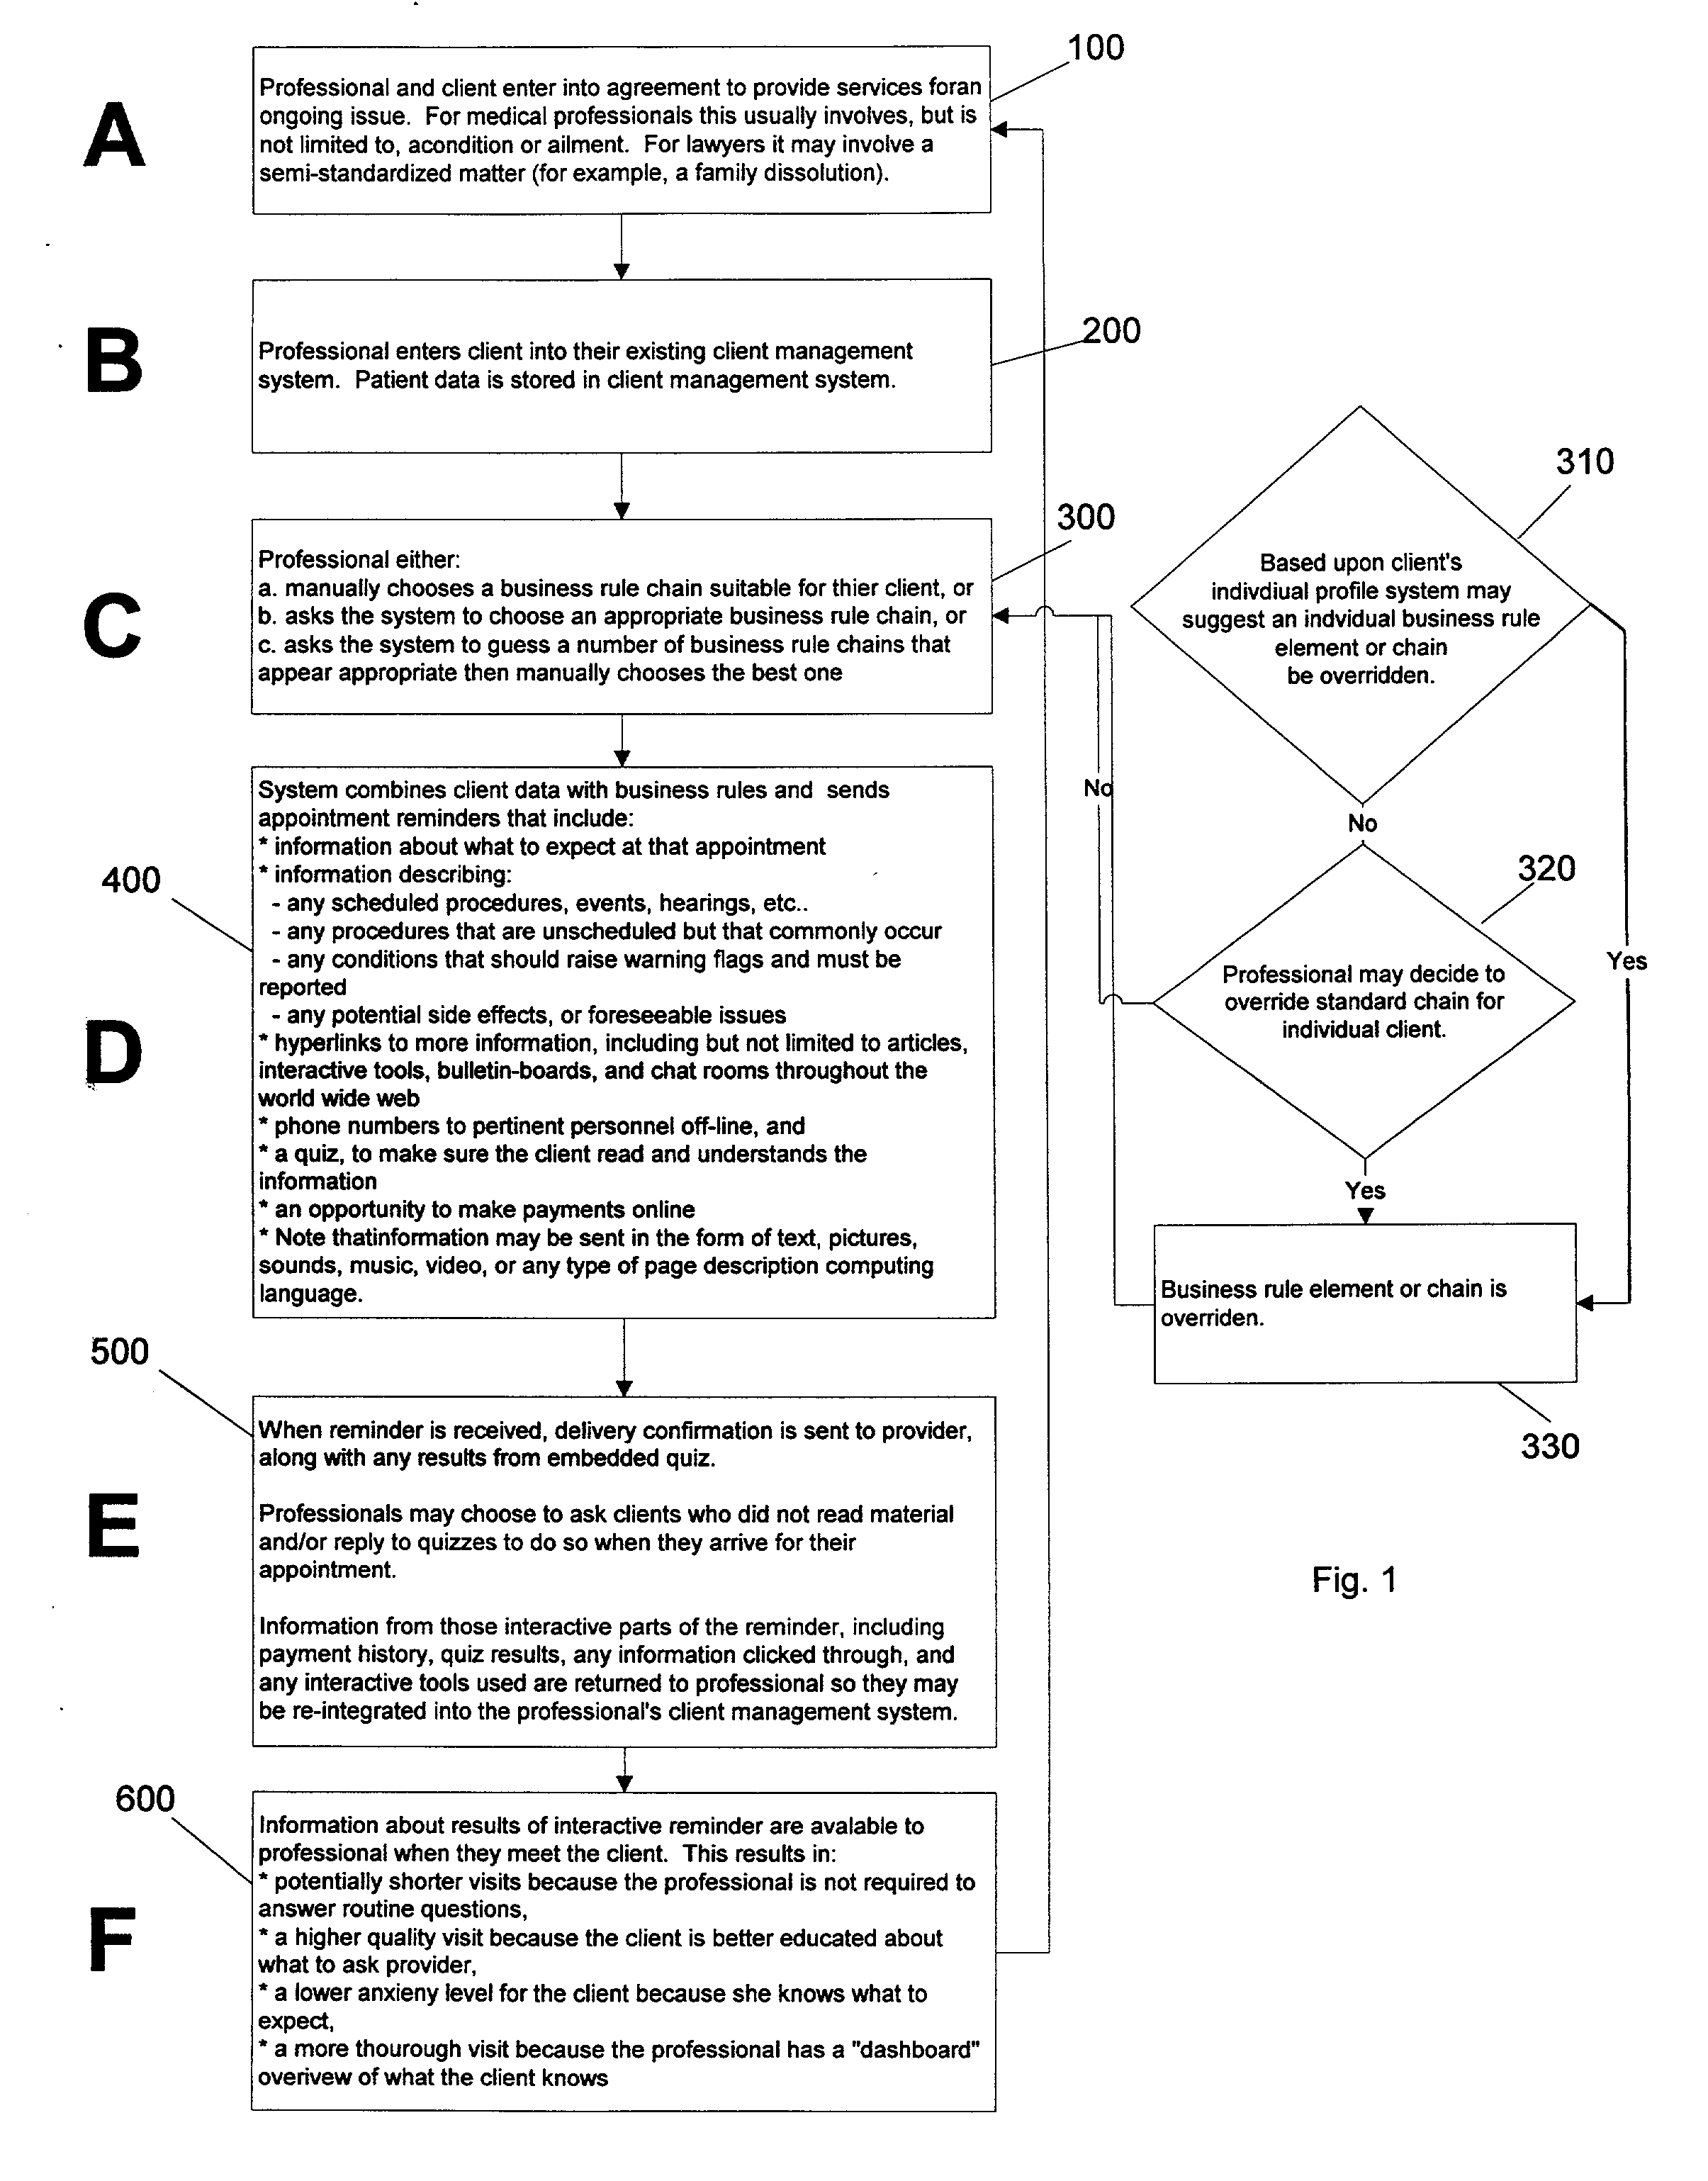 System and method for educating, managing, and evaluating clients of professionals